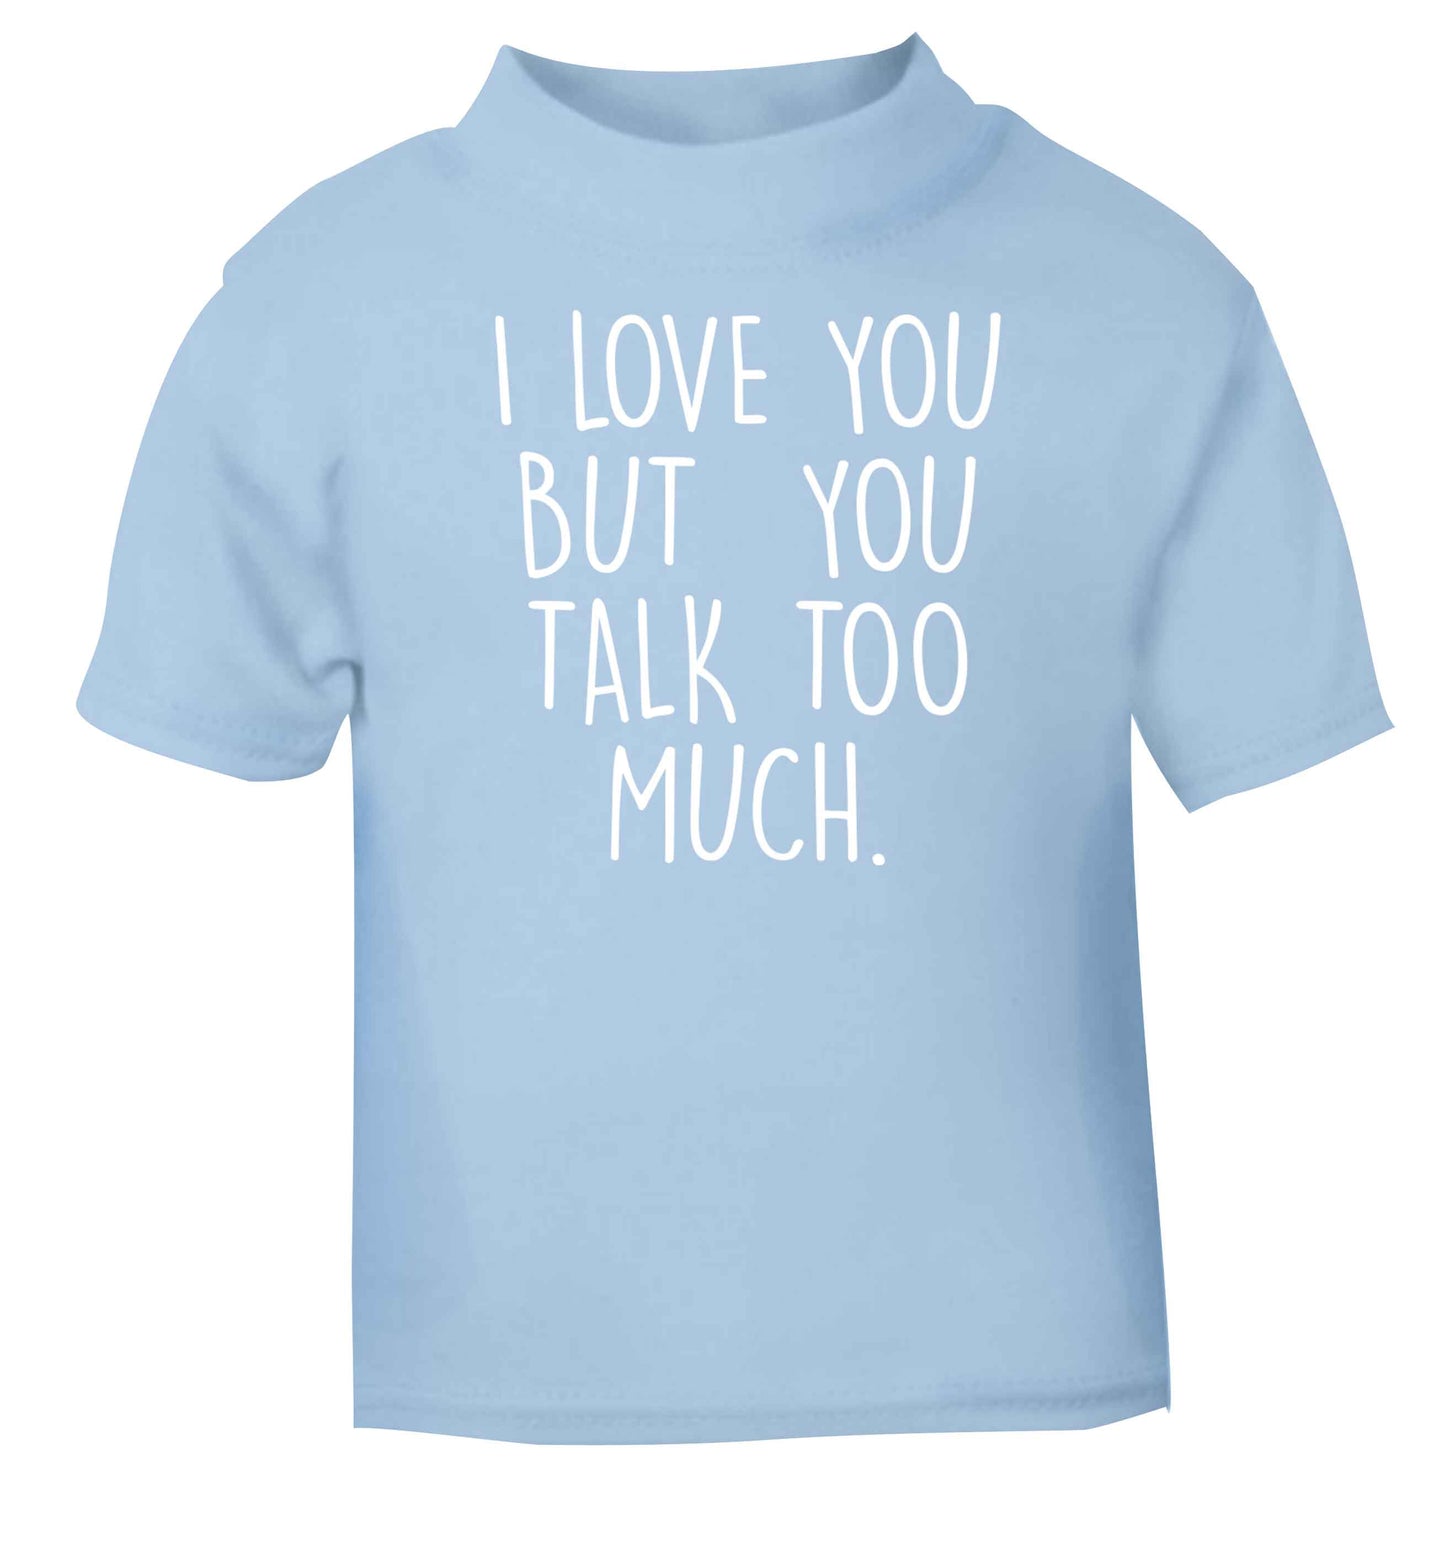 I love you but you talk too much light blue baby toddler Tshirt 2 Years